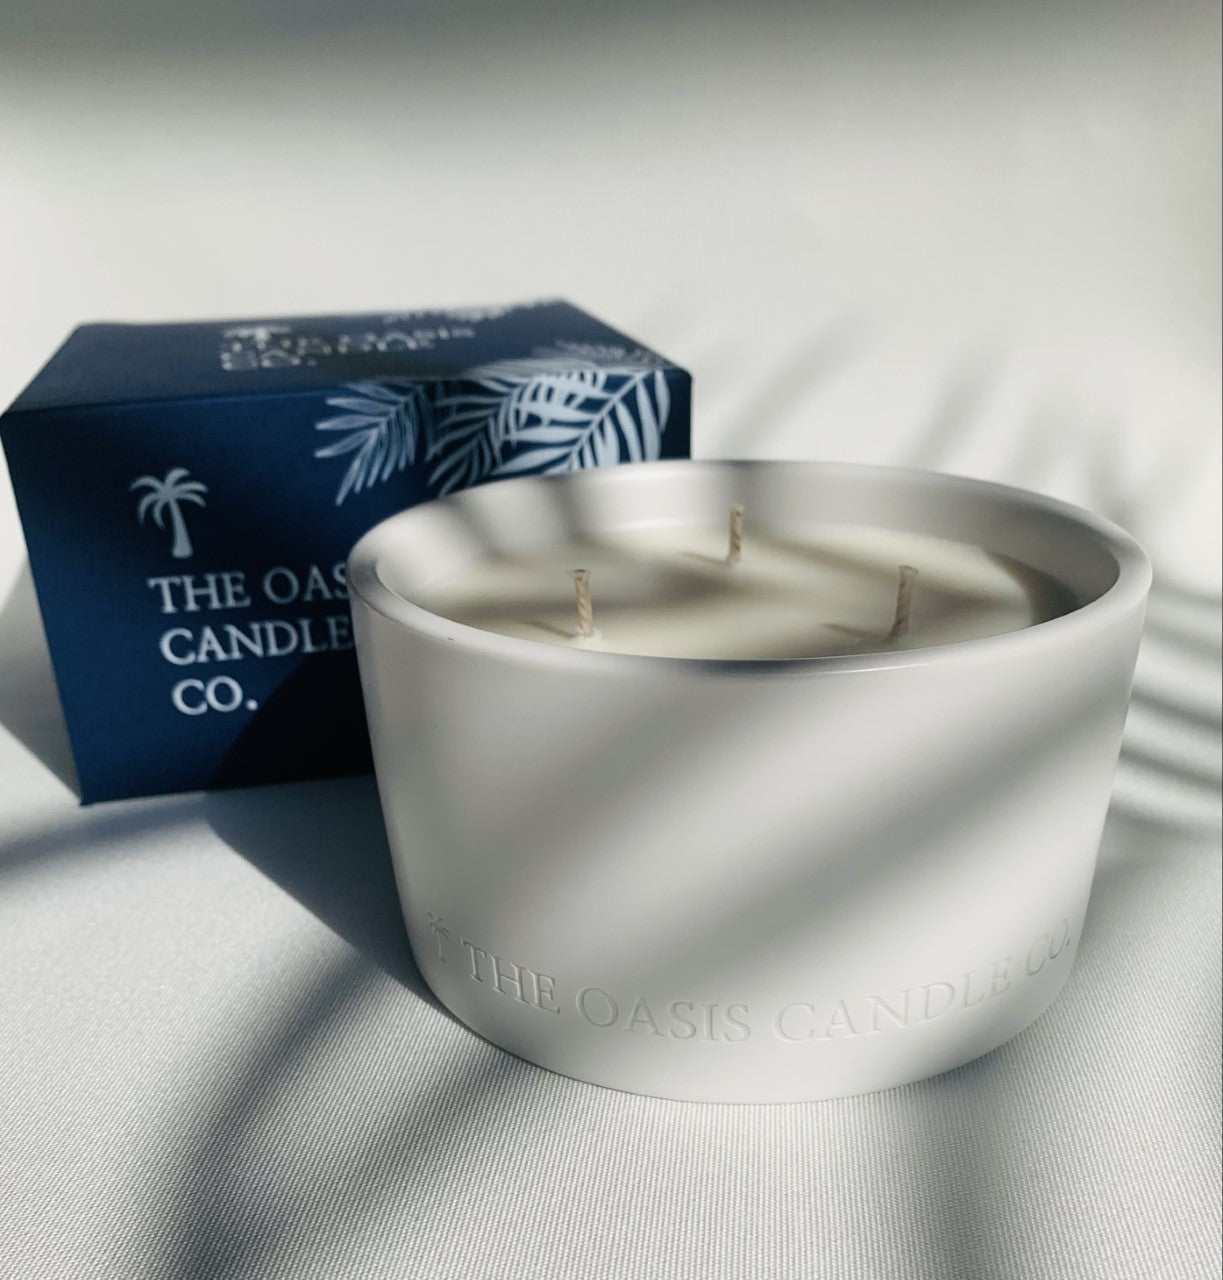 A Cassis and Fig scented candle from home fragrance brand, The Oasis Candle Co